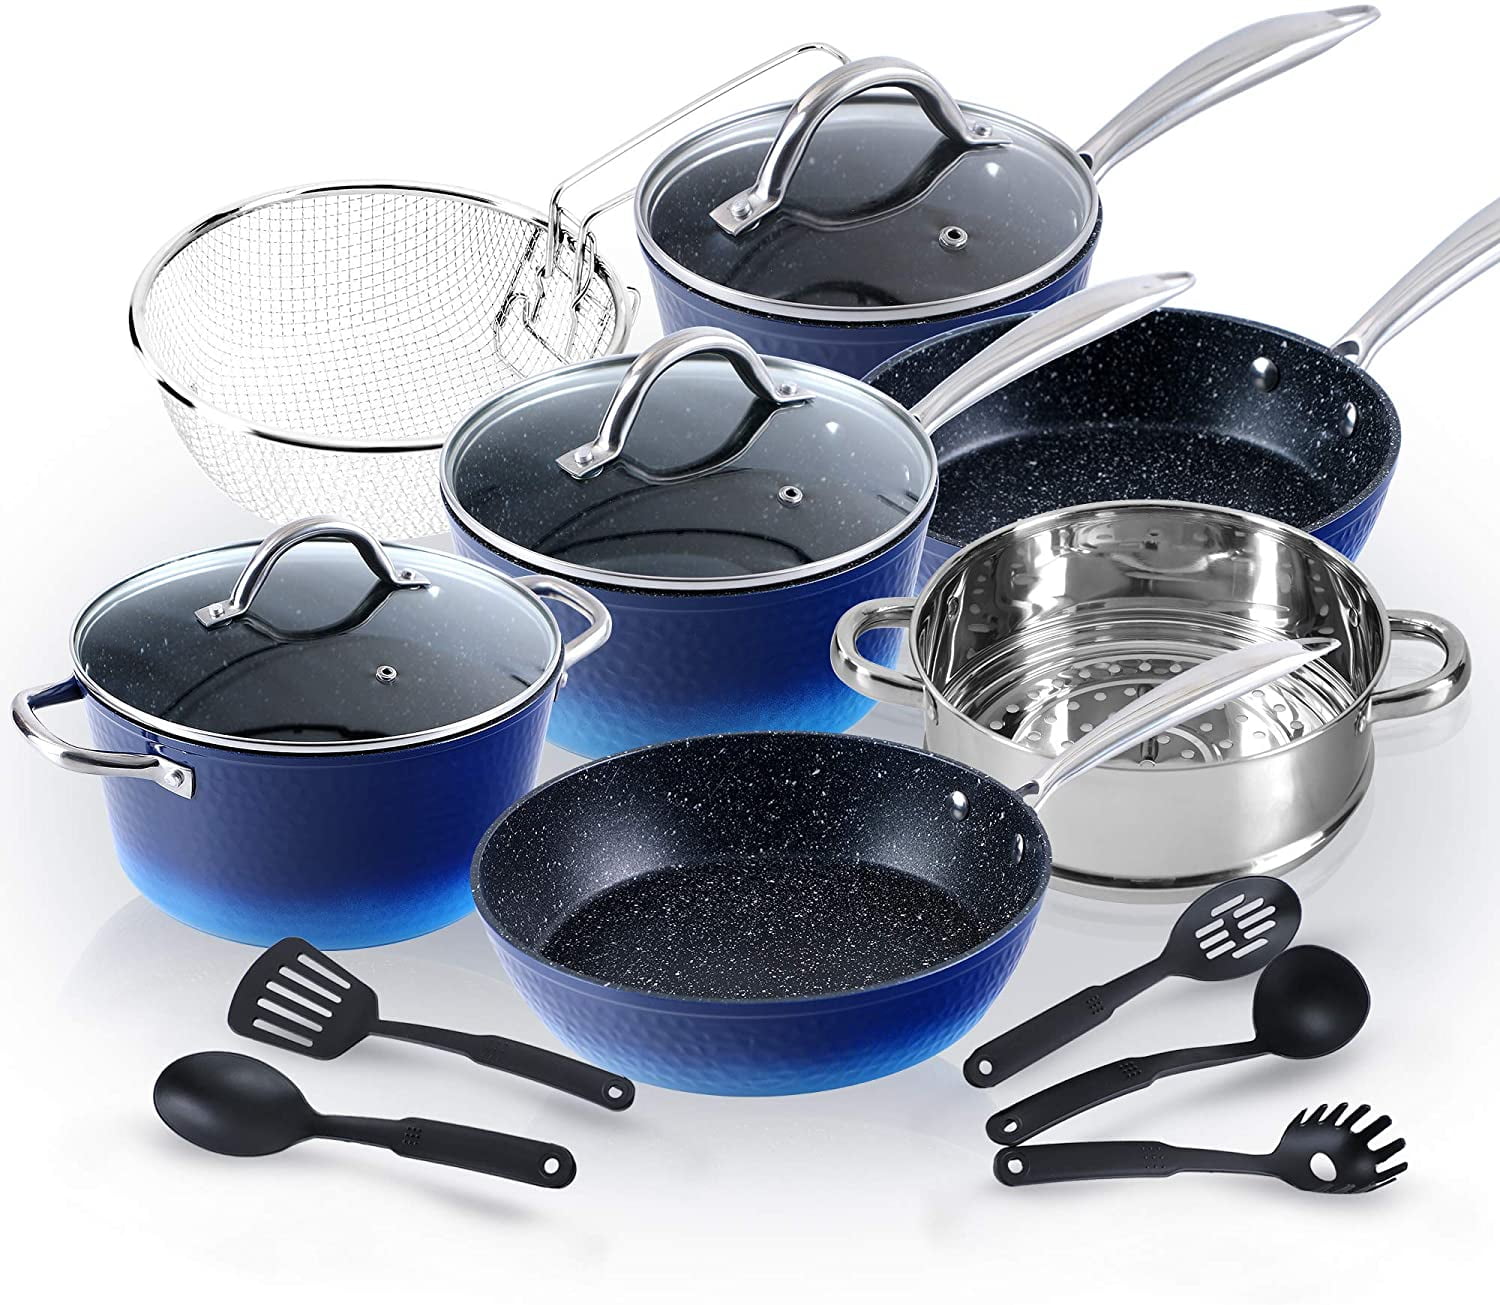 Cookware Set 9-Piece Pots And Pans Kitchen Home Nonstick Cooking Stainless Steel 